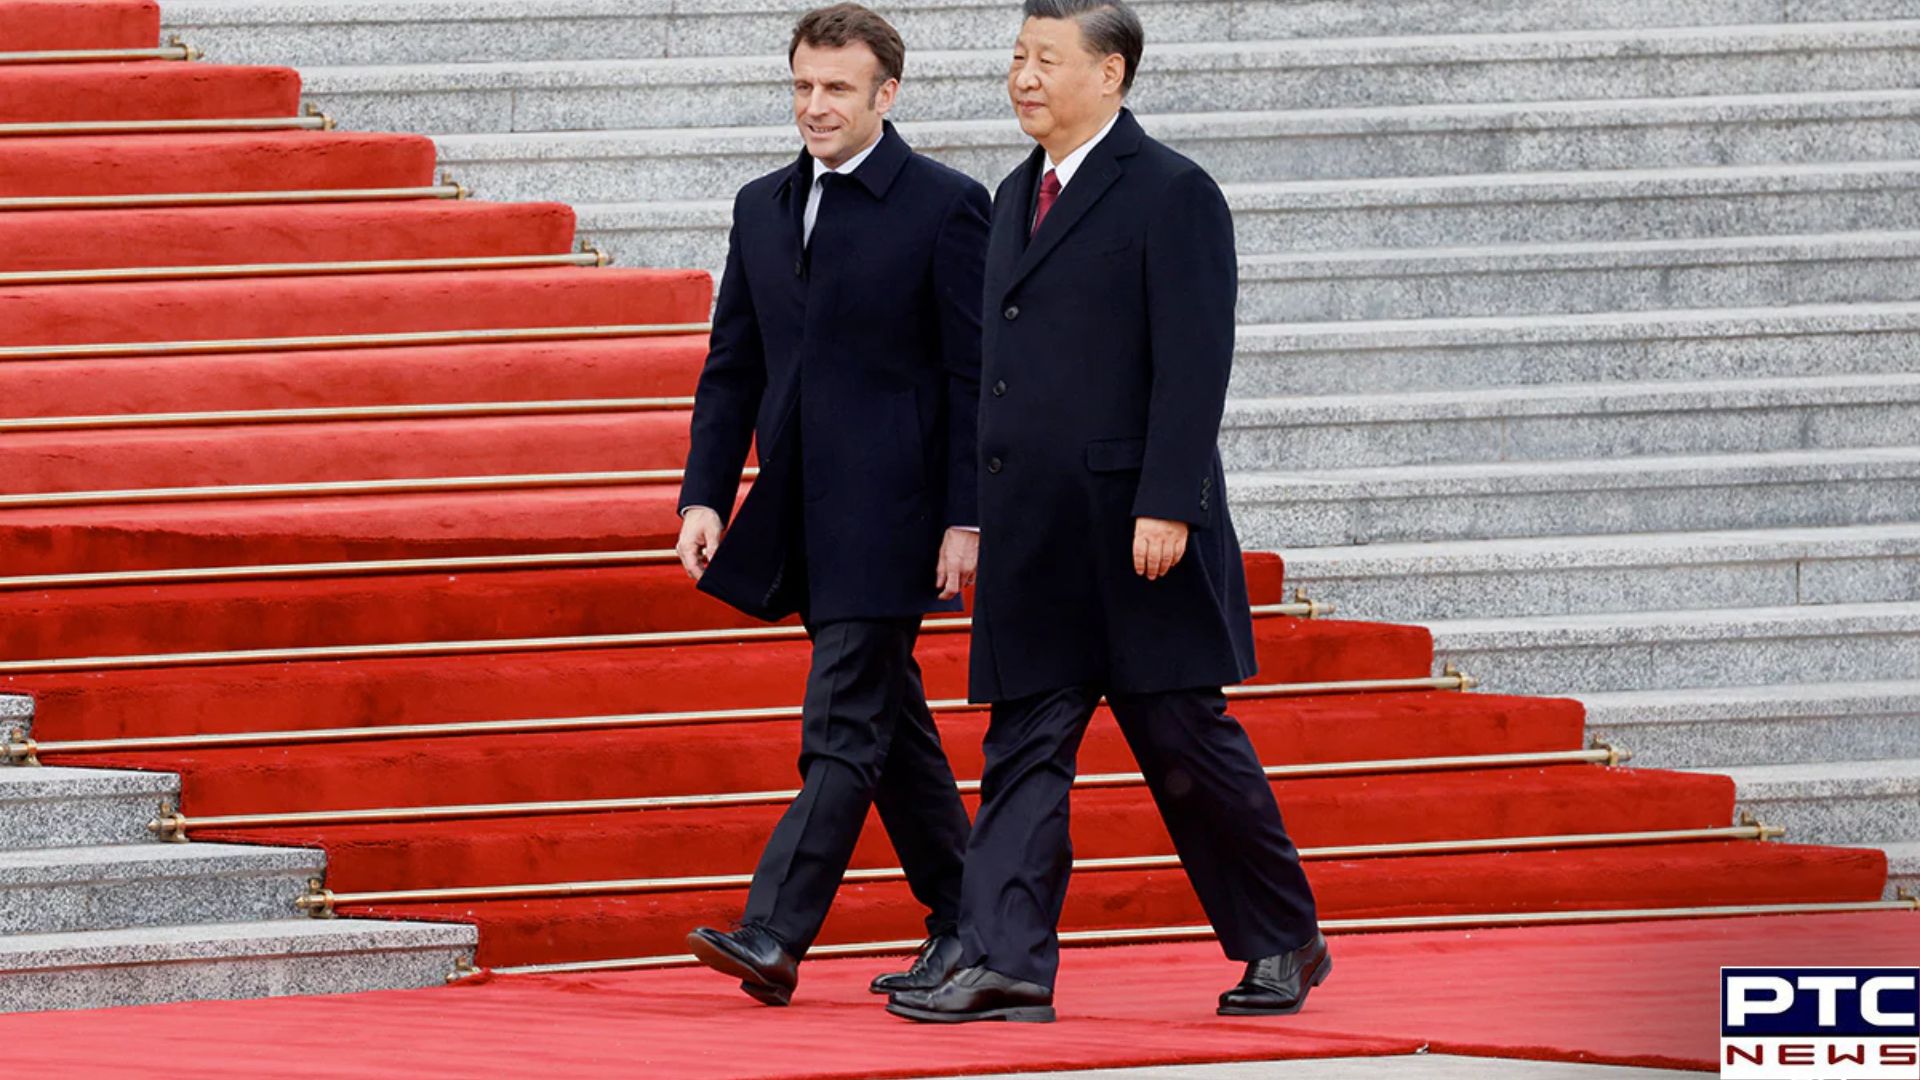 Xi Jinping proposes strengthening ties with France after Macron's India visit